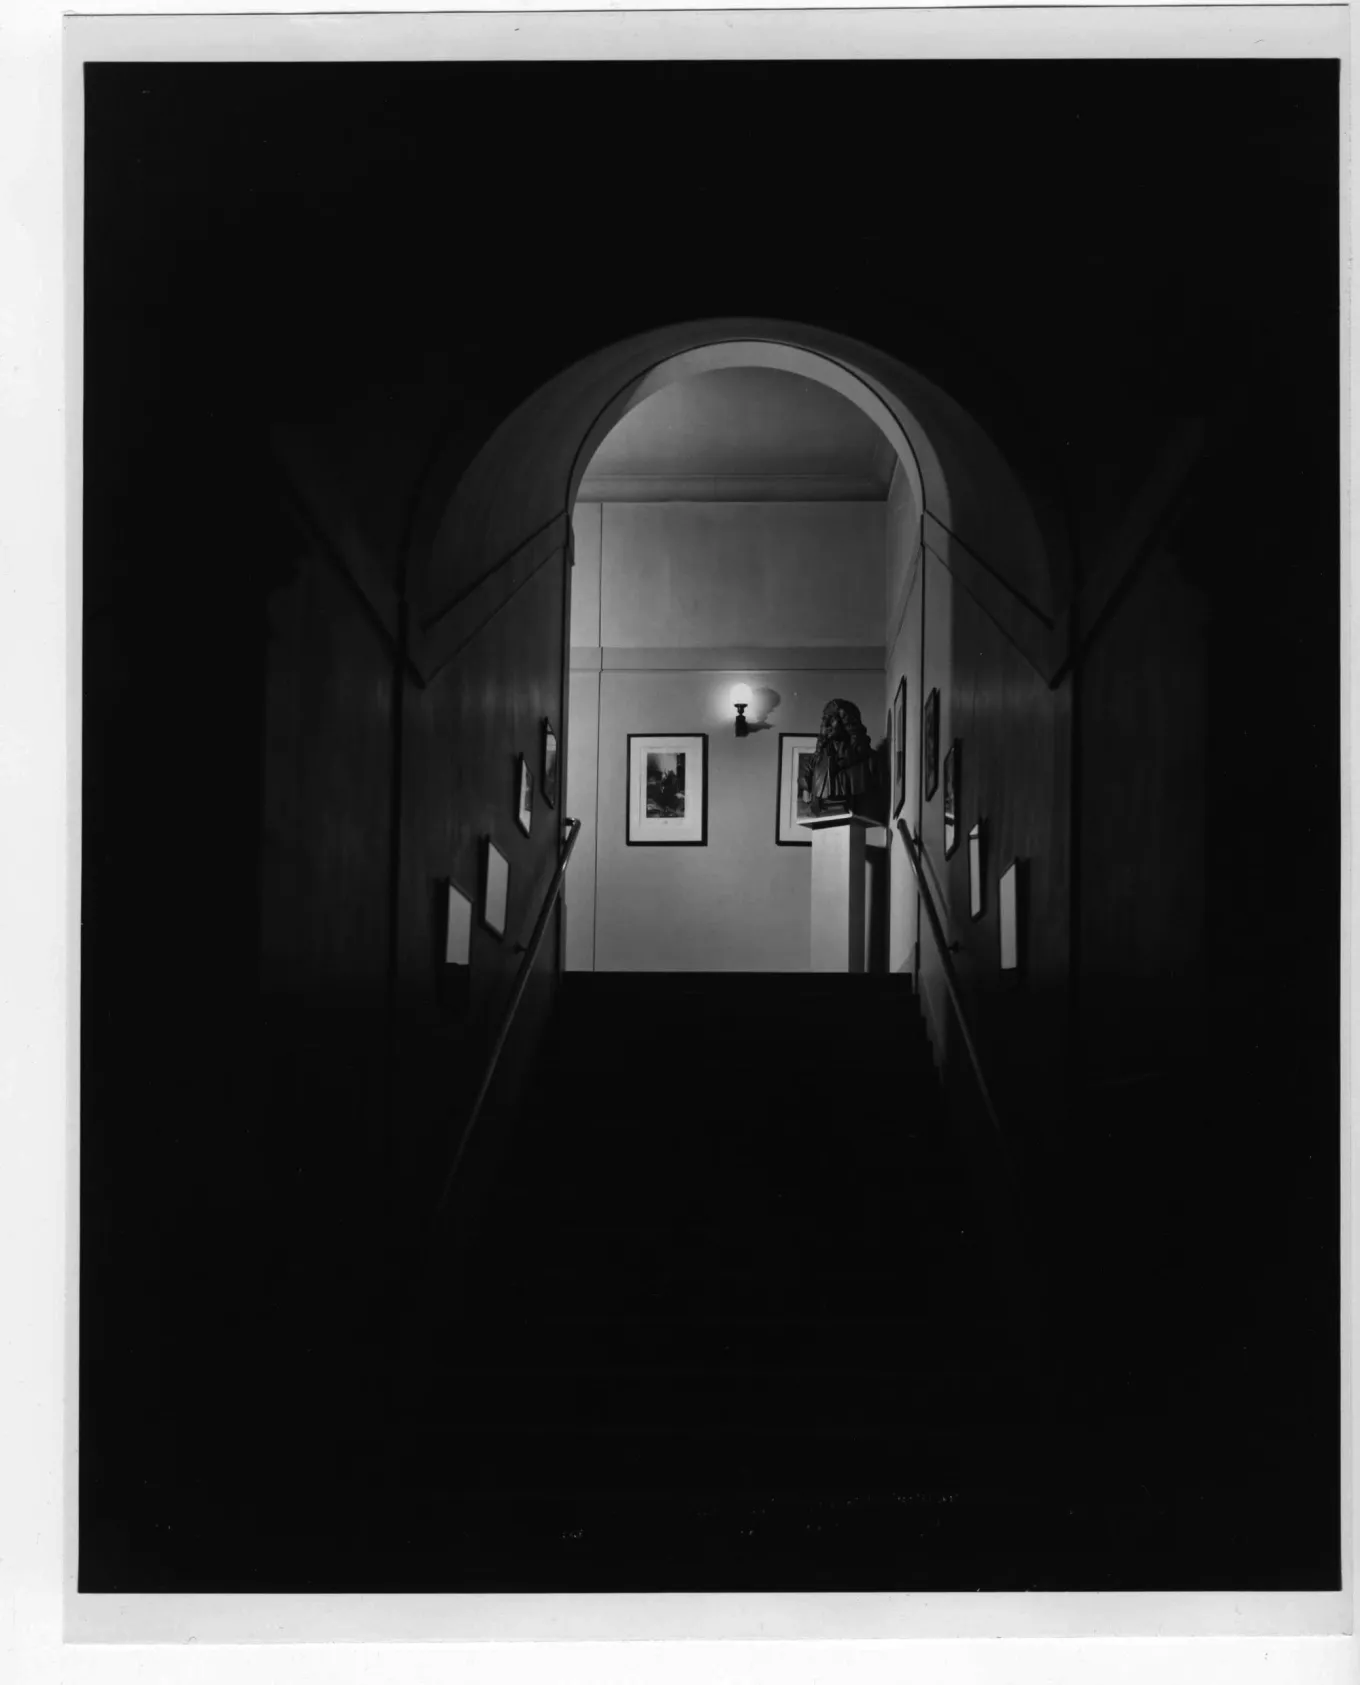 A black and white photograph of a dark stairwell that leads up to the arched doorway of a brightly lit room. Framed objects hang along the stairwell walls and within the room atop the stairs.